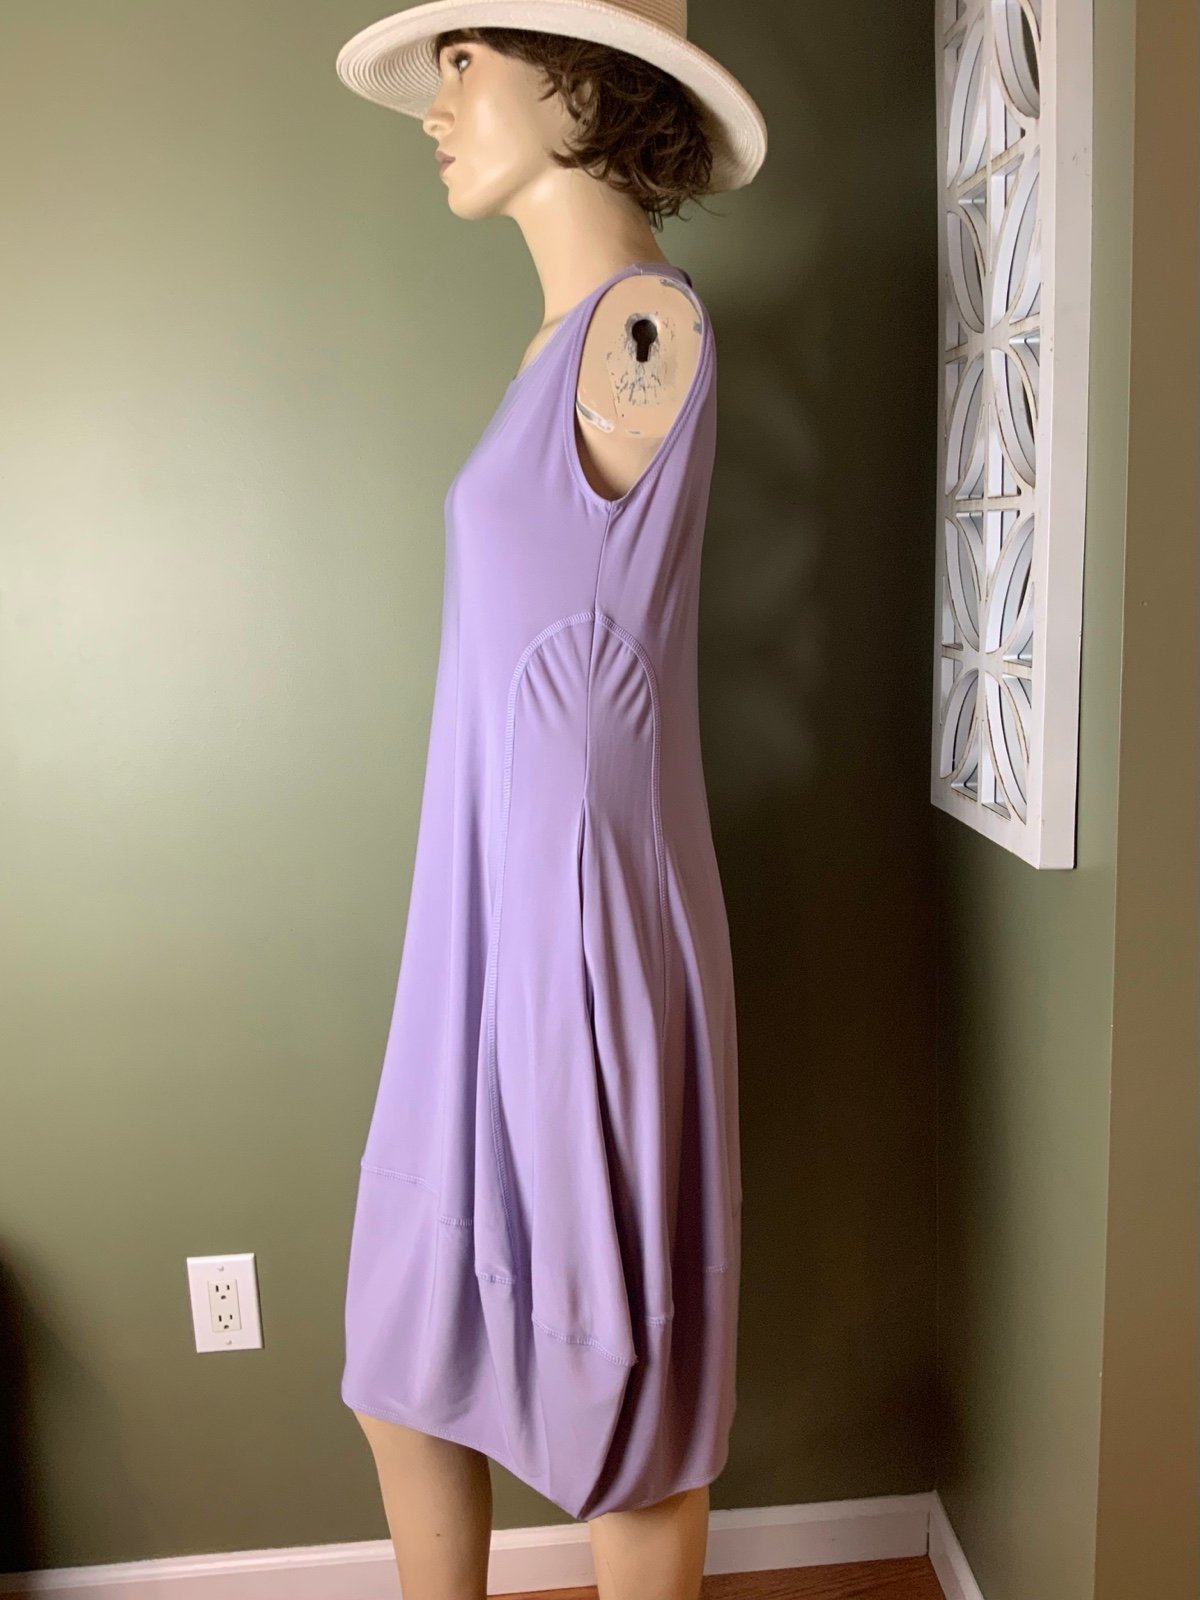 Popular Marla Wynne lavender dress brand new with tags xs super comfortable NKdblpoeh well sale